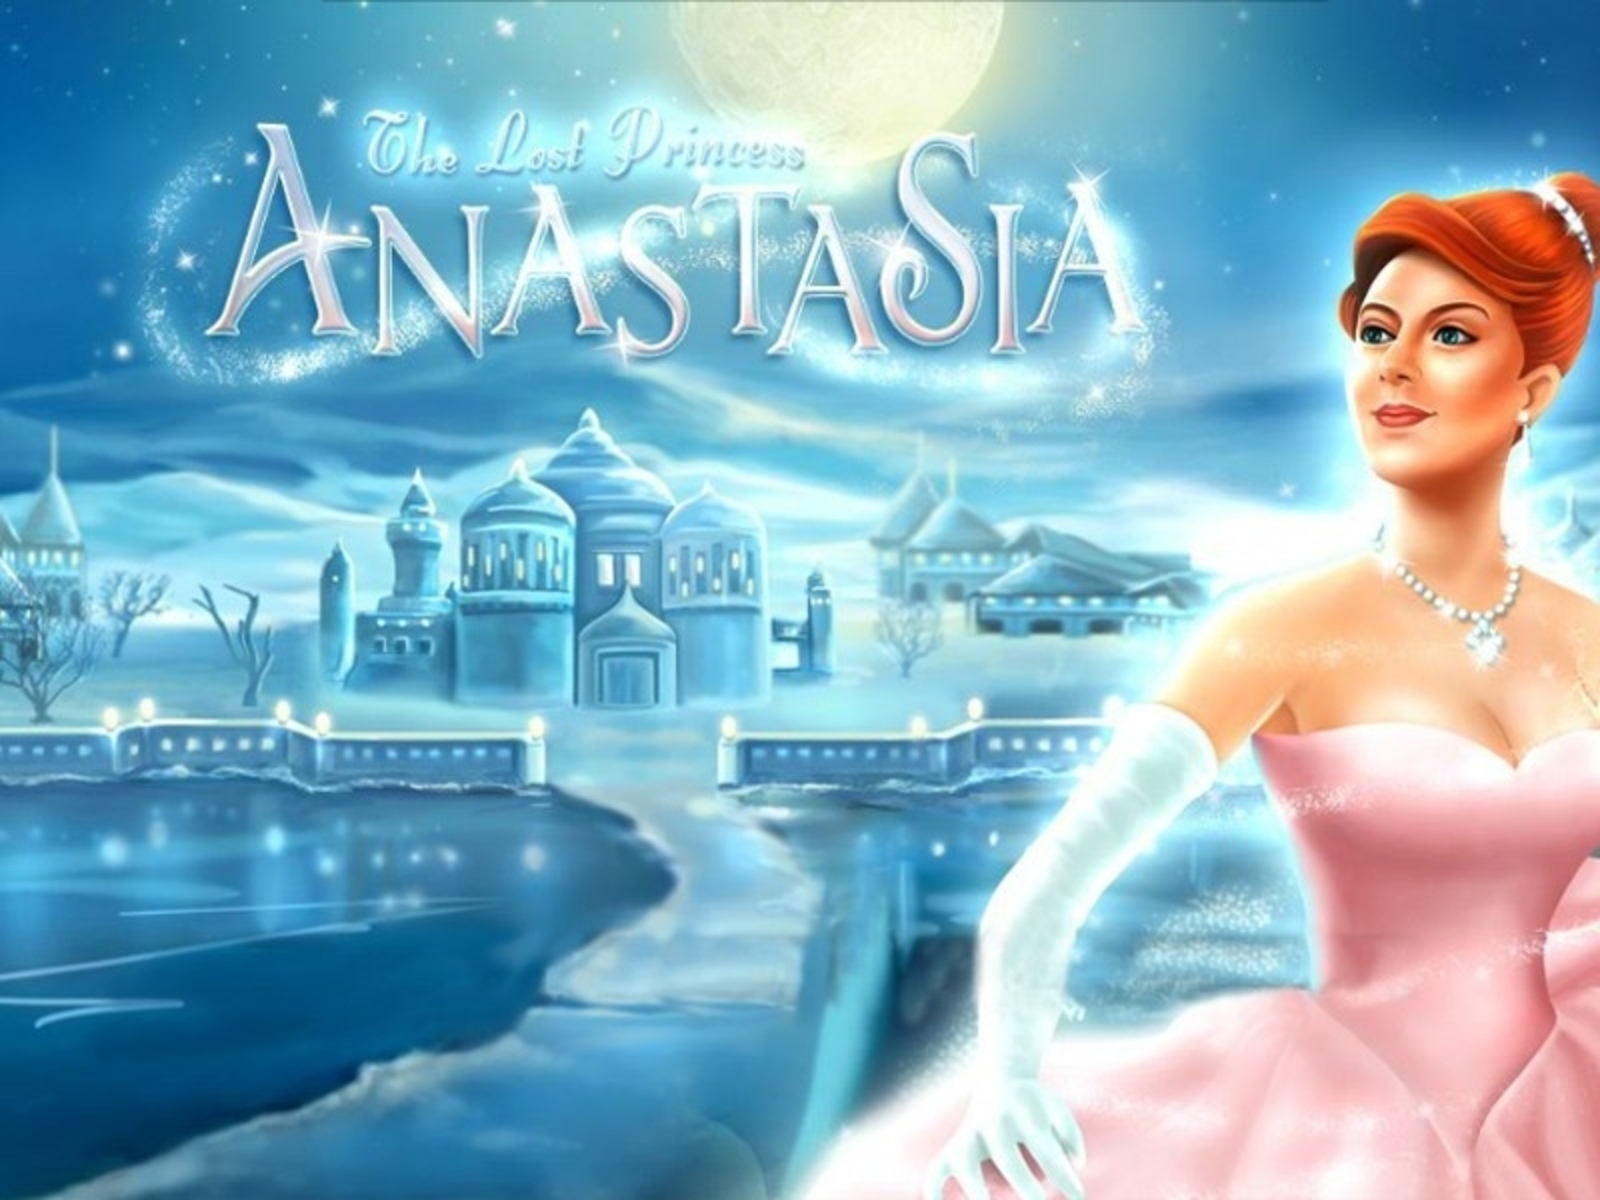 The The Lost Princess Anastasia Online Slot Demo Game by Microgaming